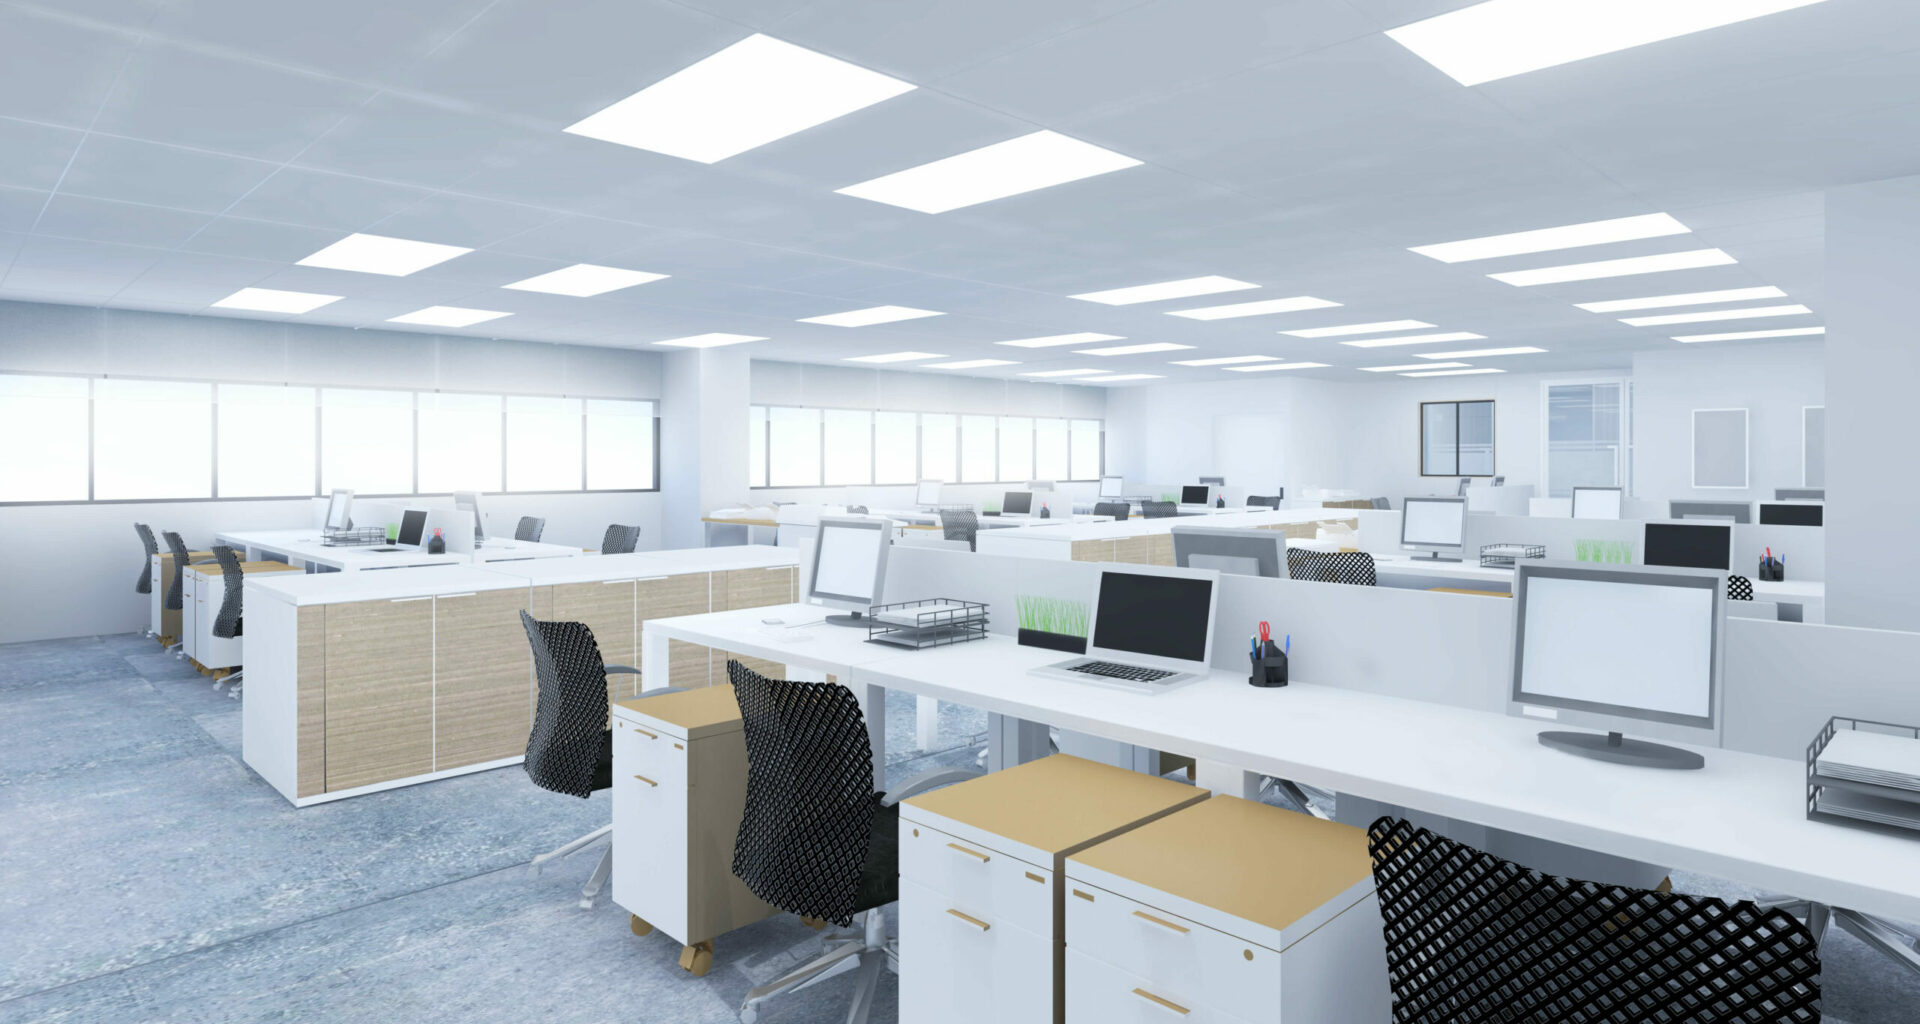 Top 5 Serviced Offices in New York for a Modern Workspace Experience